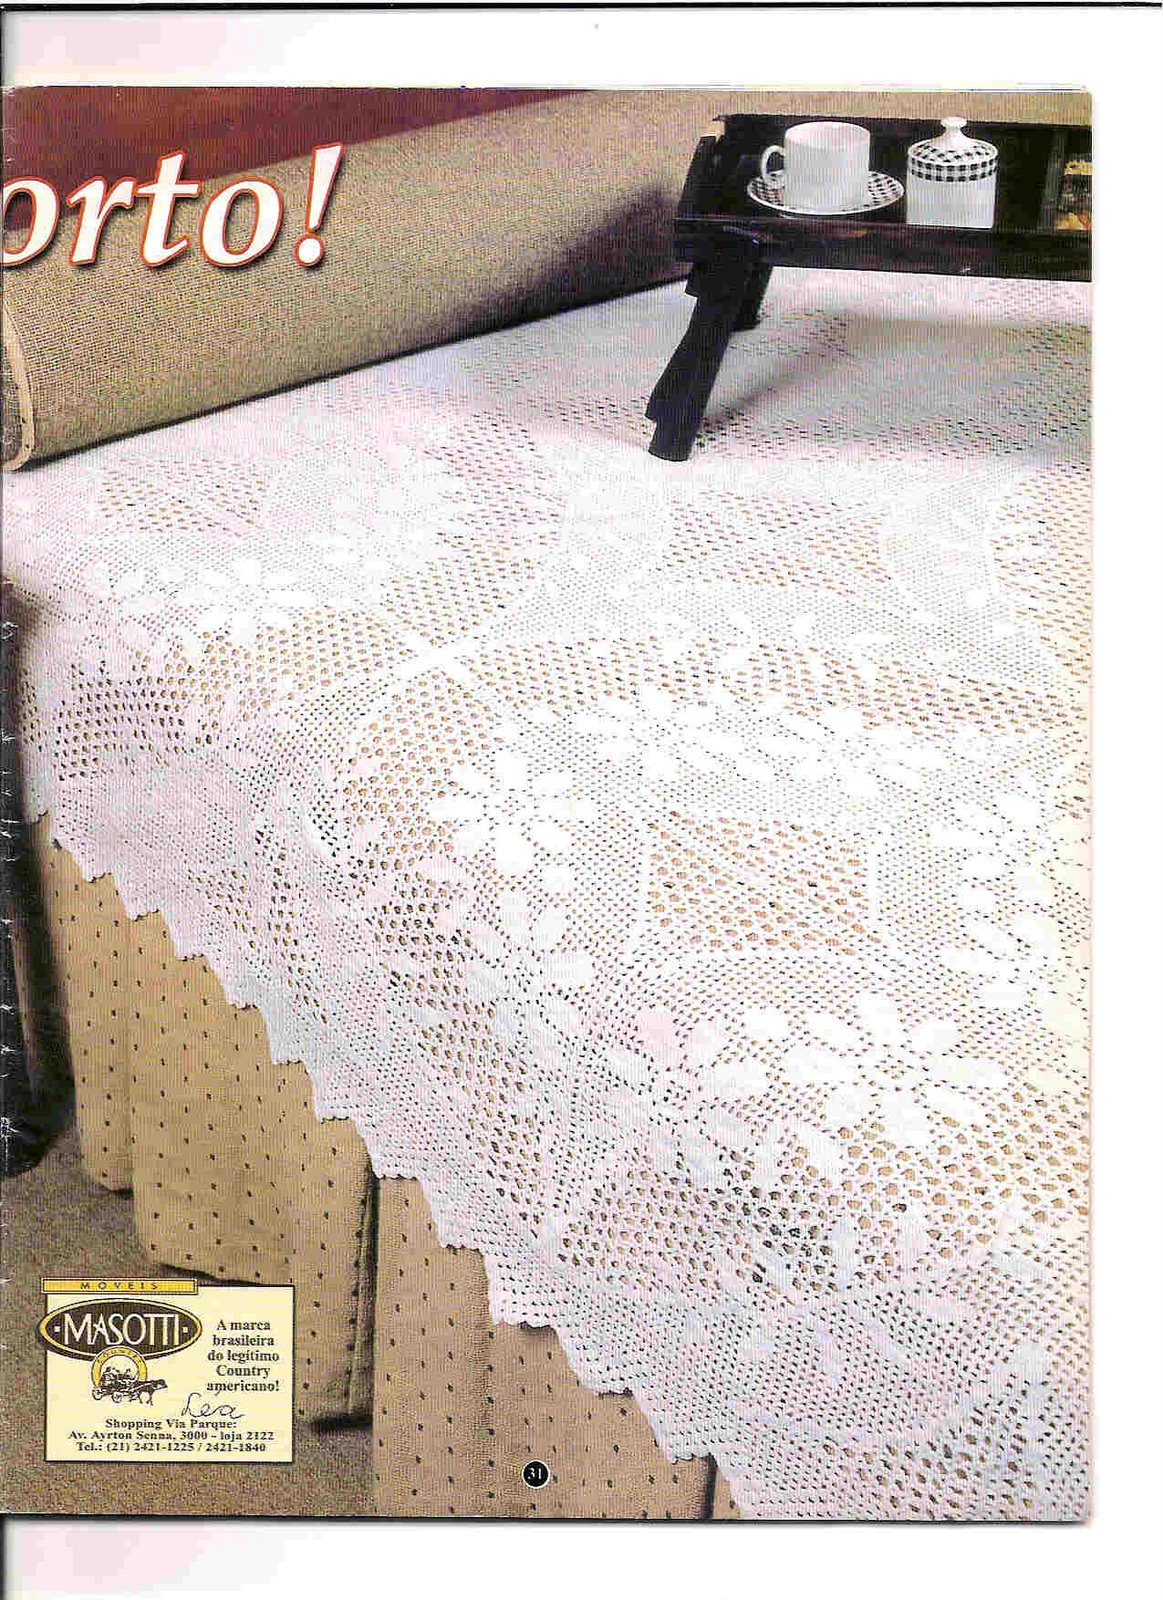 bedspread filet modules with large flowers (1)